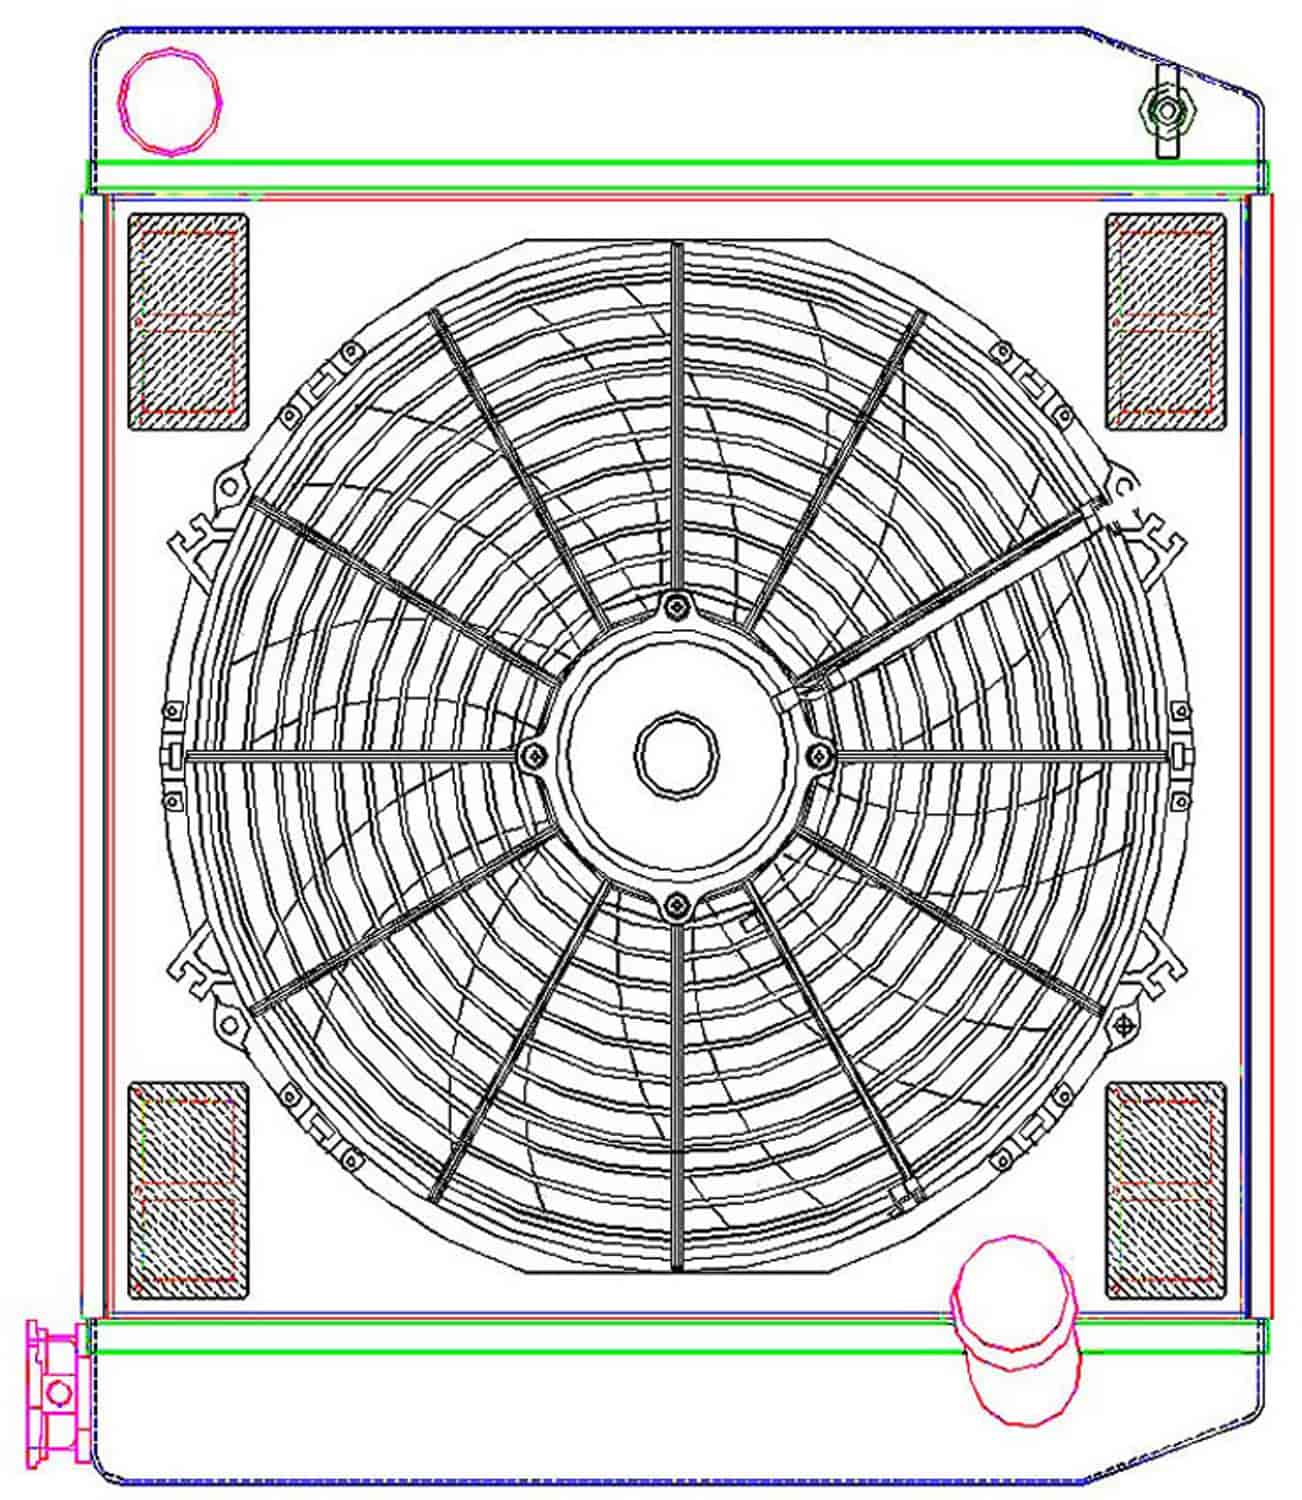 MegaCool ComboUnit Universal Fit Radiator and Fan Single Pass Crossflow Design 22" x 19" with No Options